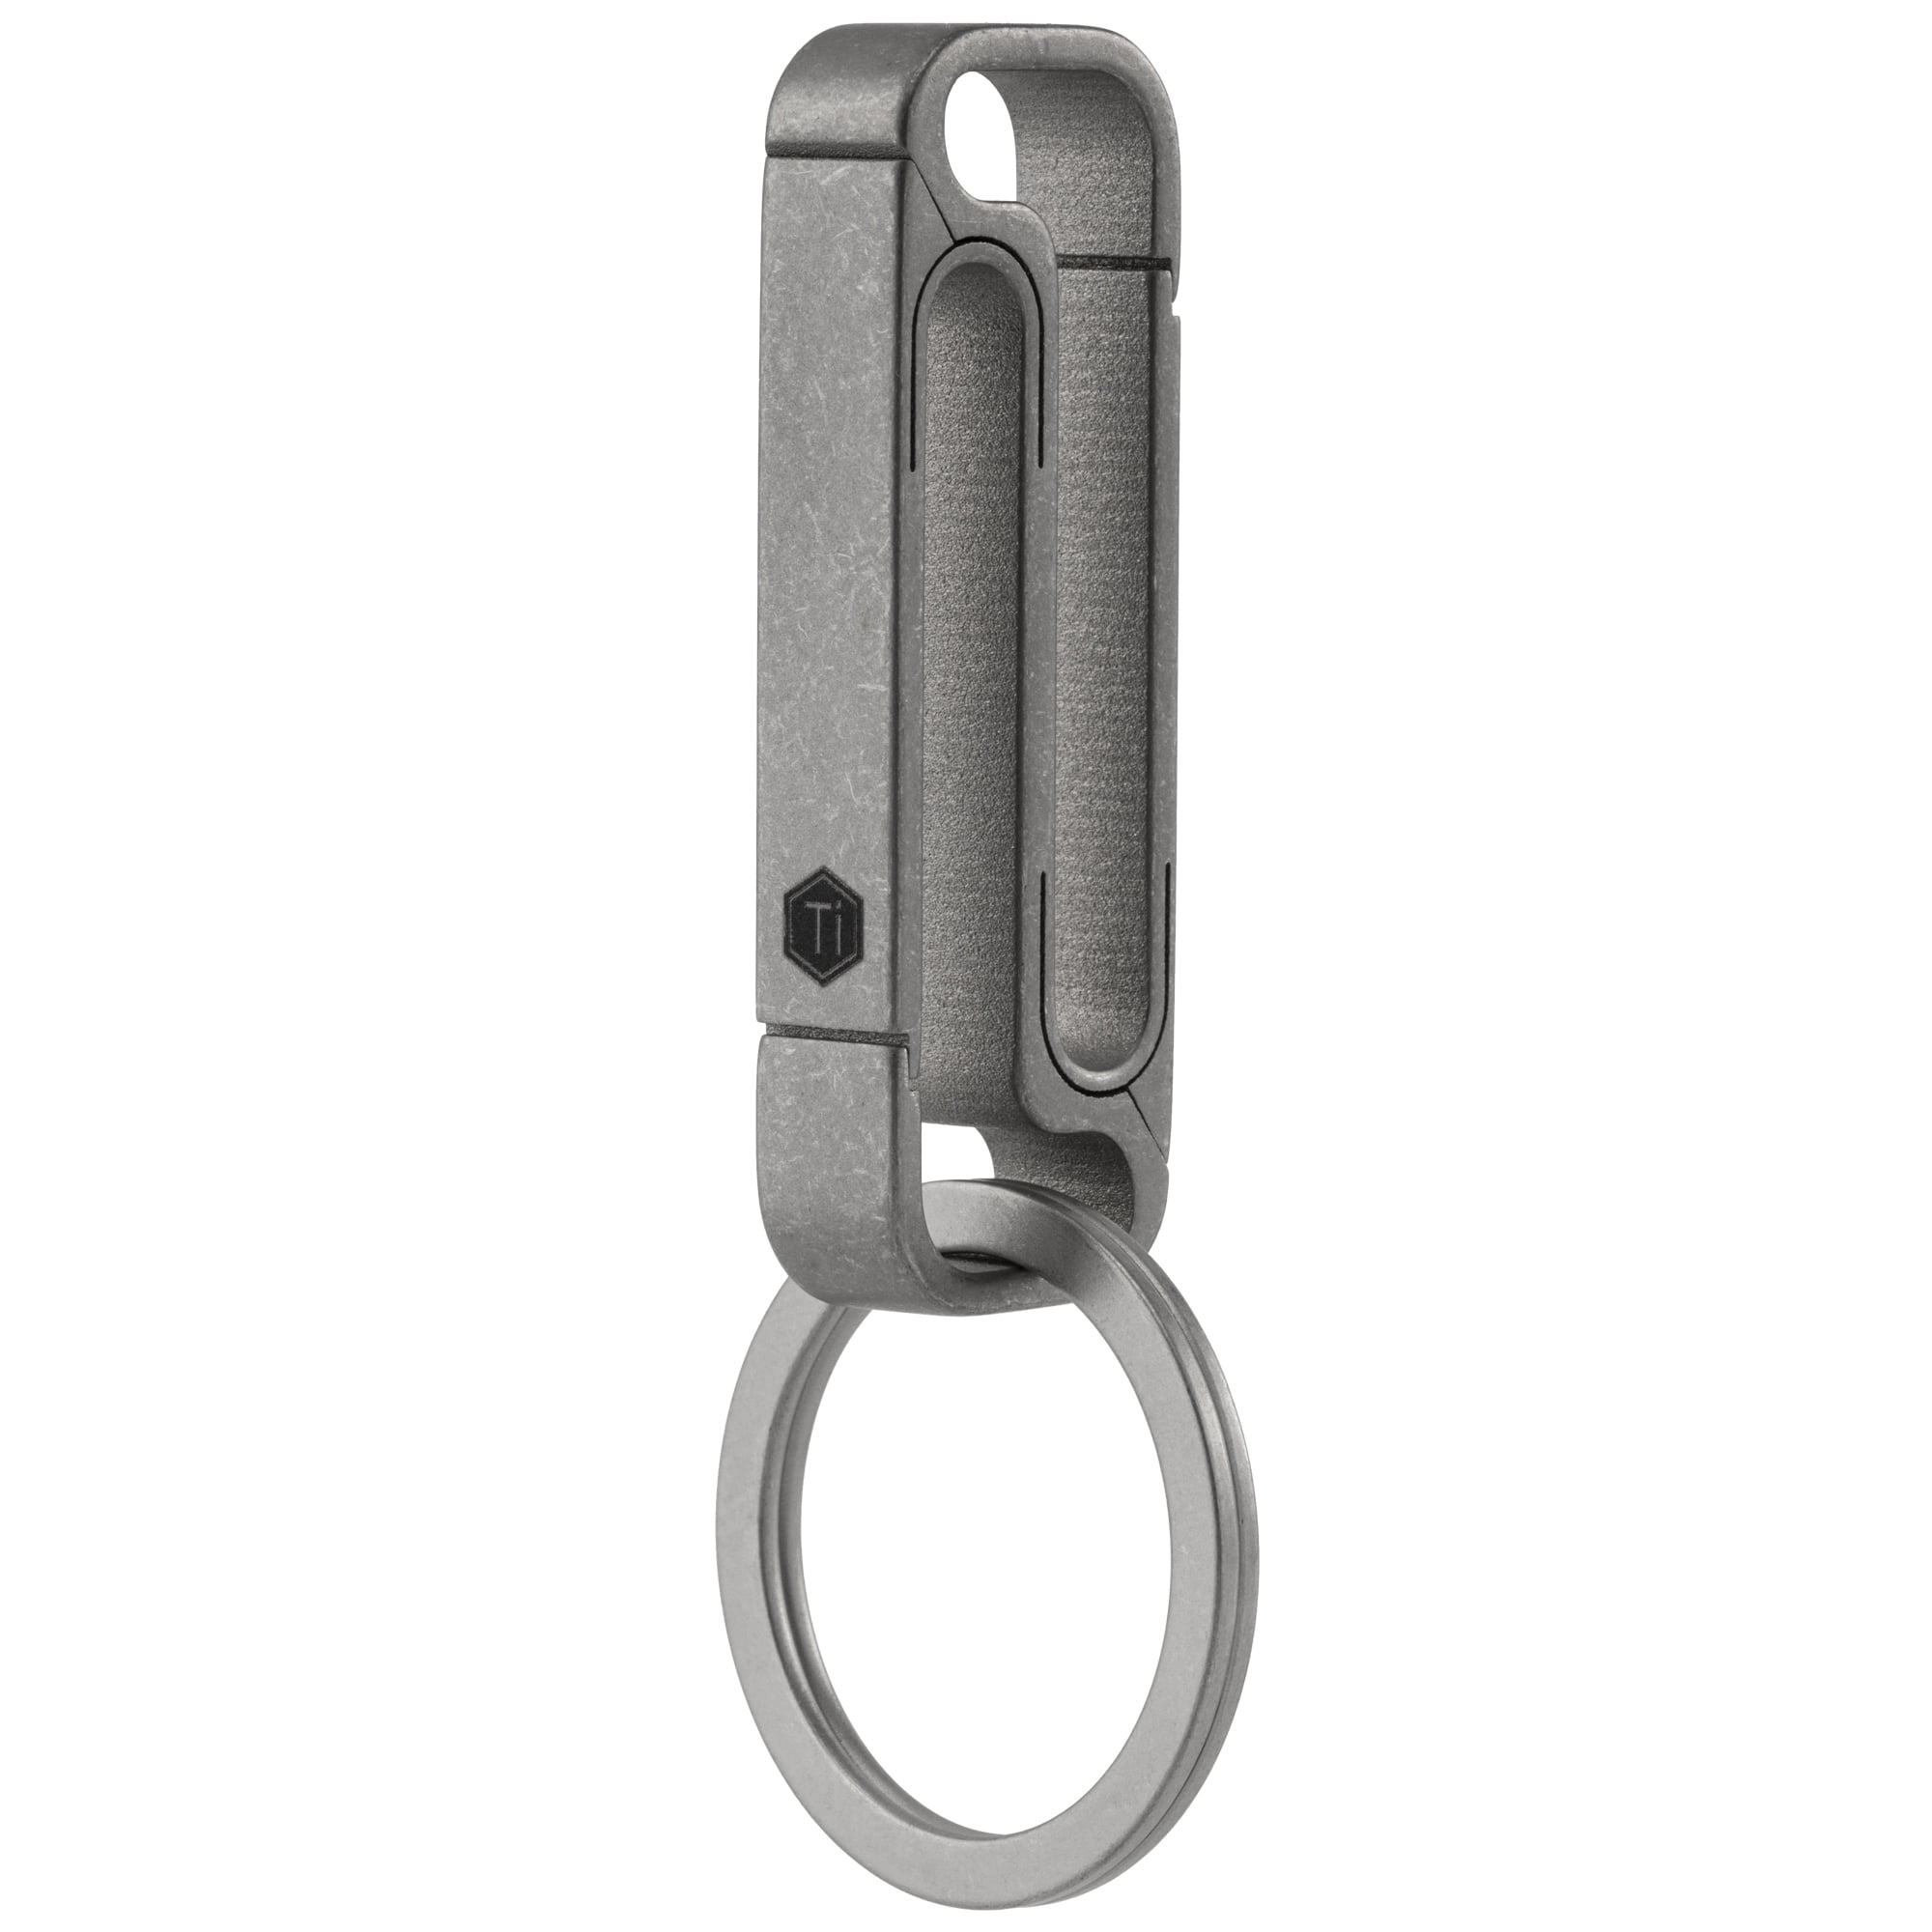 Mgaxyff Key Chain Clip,key Ring,Outdoor Alloy Quick Release Carabiner Key Buckle Clip Keyring Climbing Accessory, Women's, Size: One size, Black